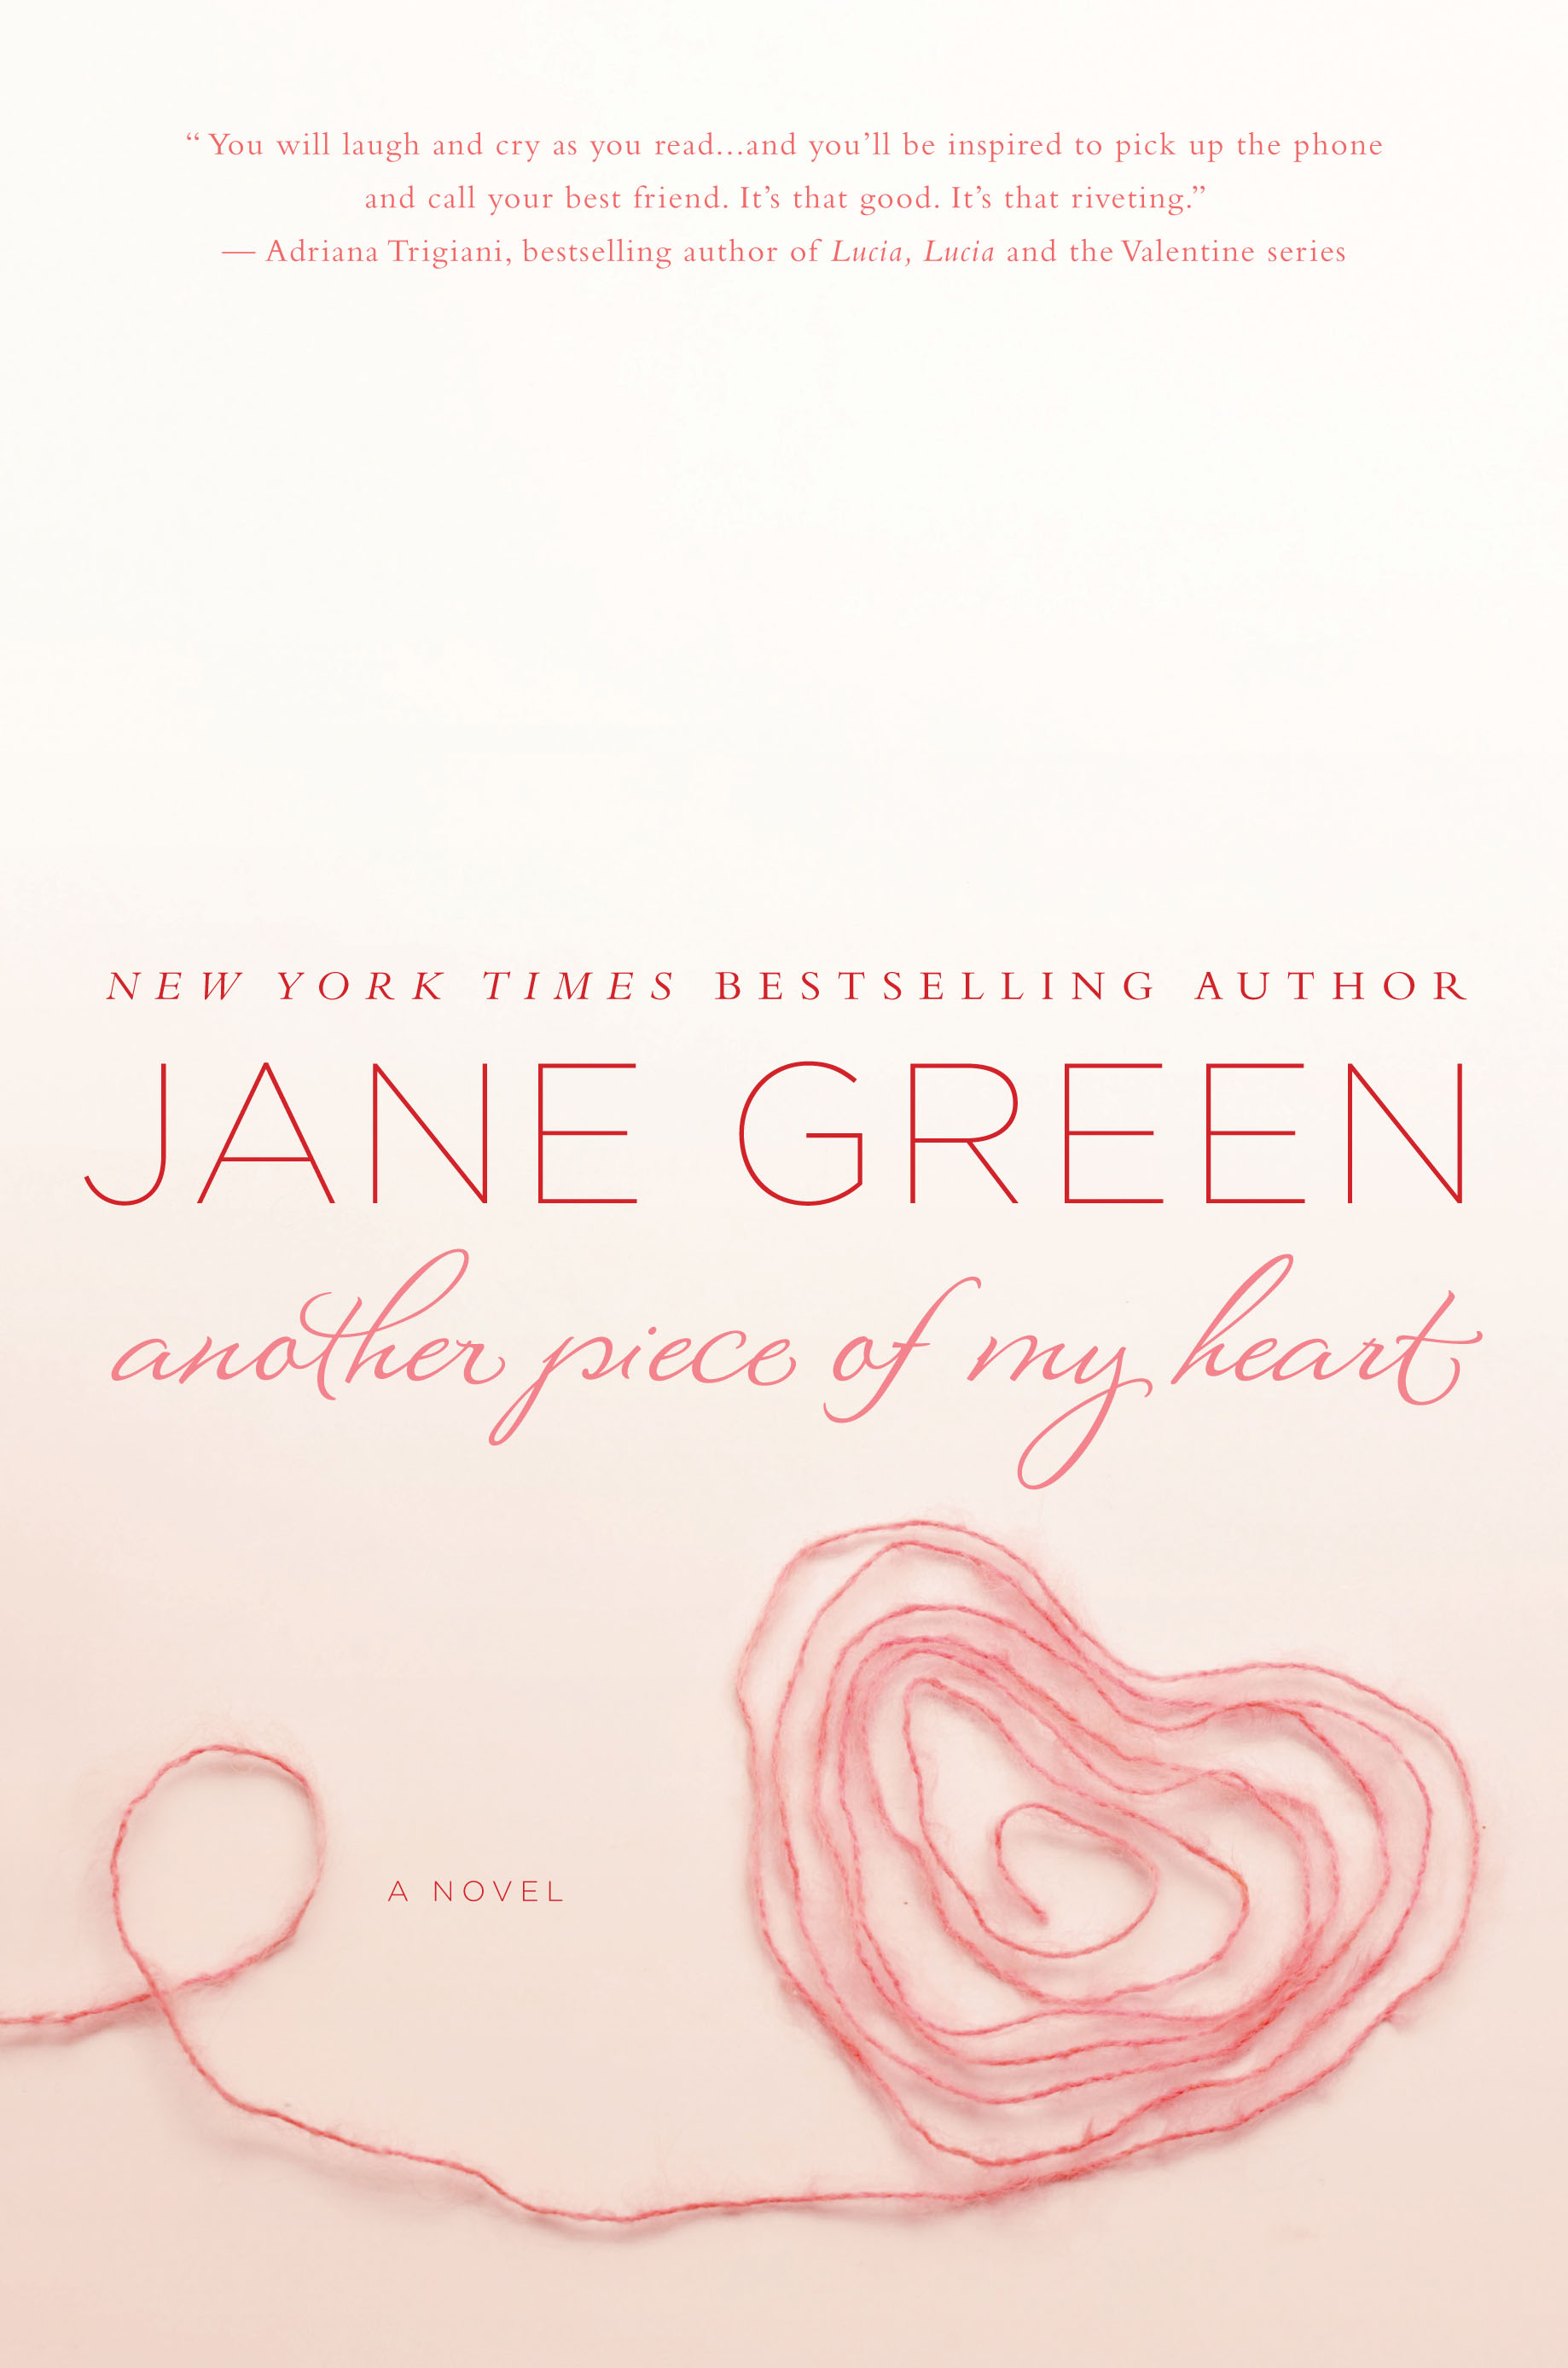 Jane Green’s. From the New York Times bestselling author of JEMIMA J